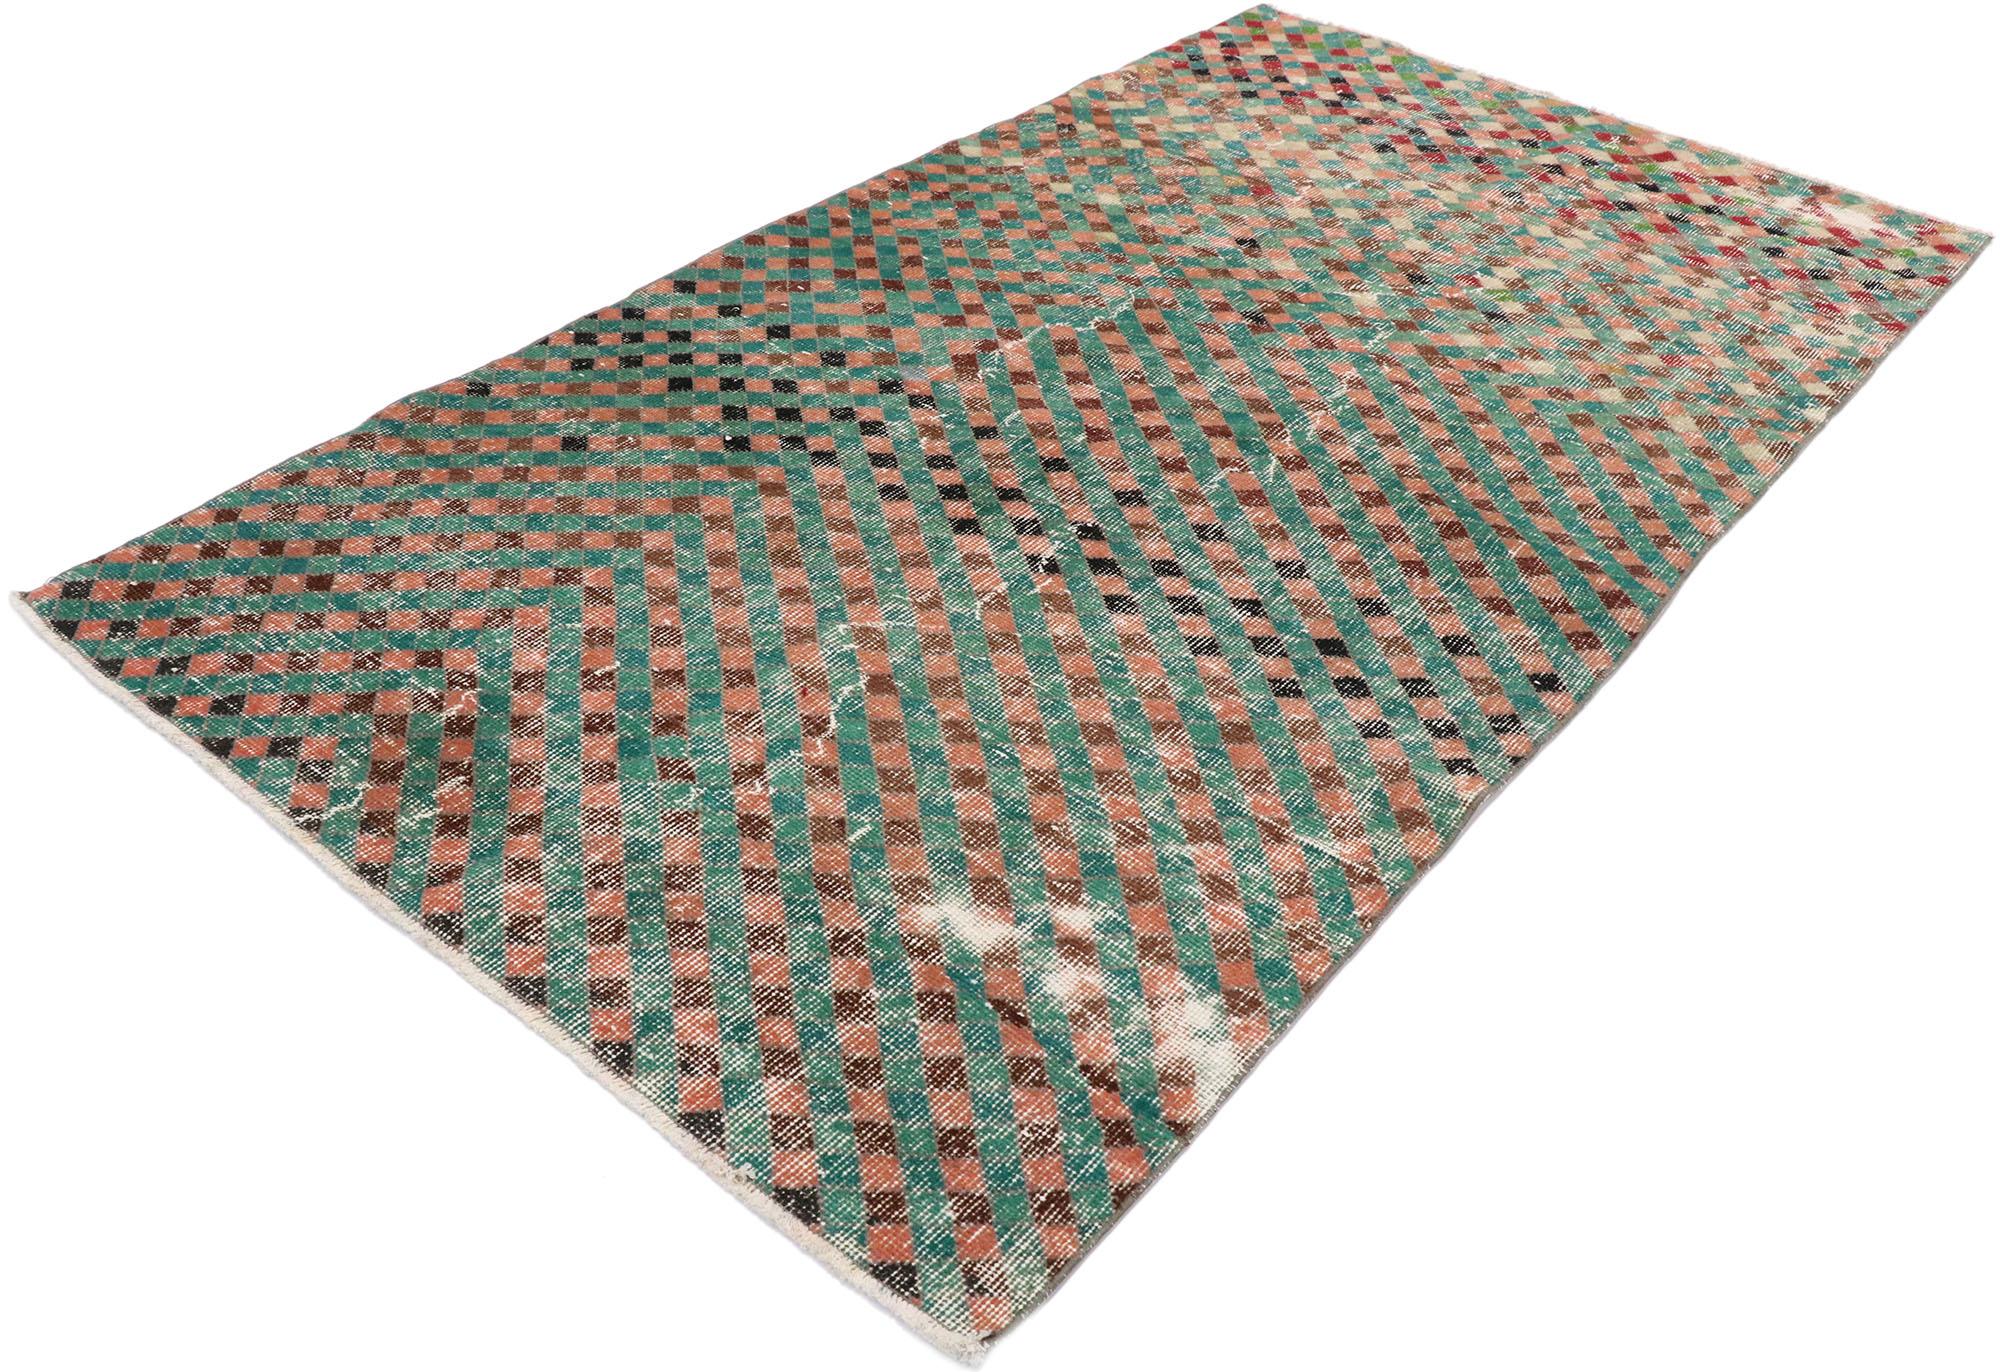 53351, distressed vintage Turkish Sivas rug with rustic Mid-Century Modern style. This hand knotted wool distressed vintage Turkish Sivas rug features an all-over geometric pattern comprised of multi-colored diamonds. Gentle waves of abrash and